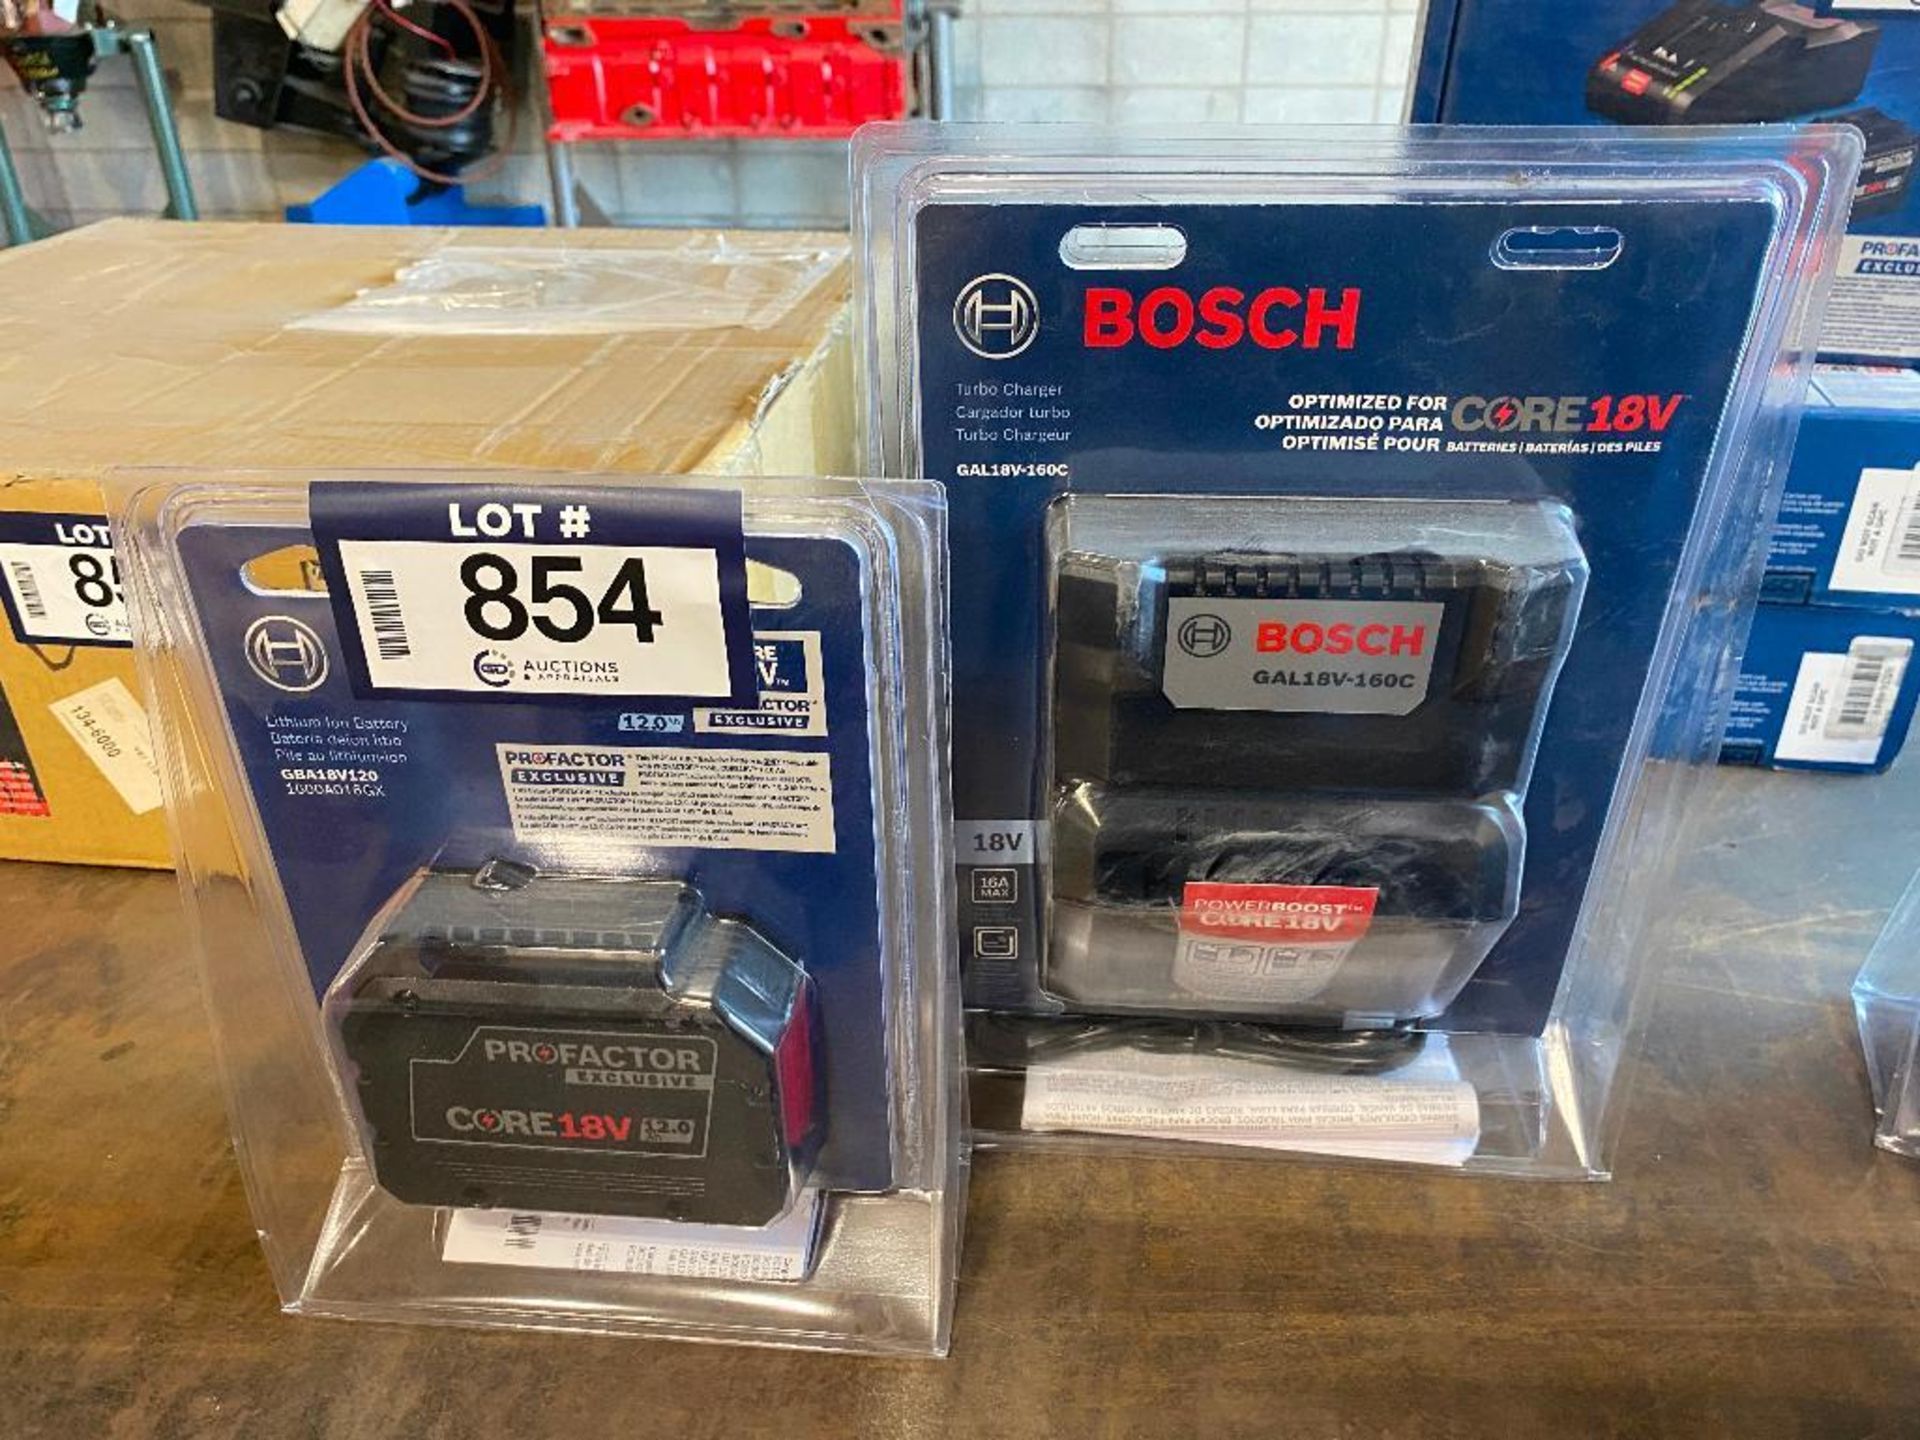 Lot of Bosch Turbo Charger and Bosch Lithium-Ion Battery